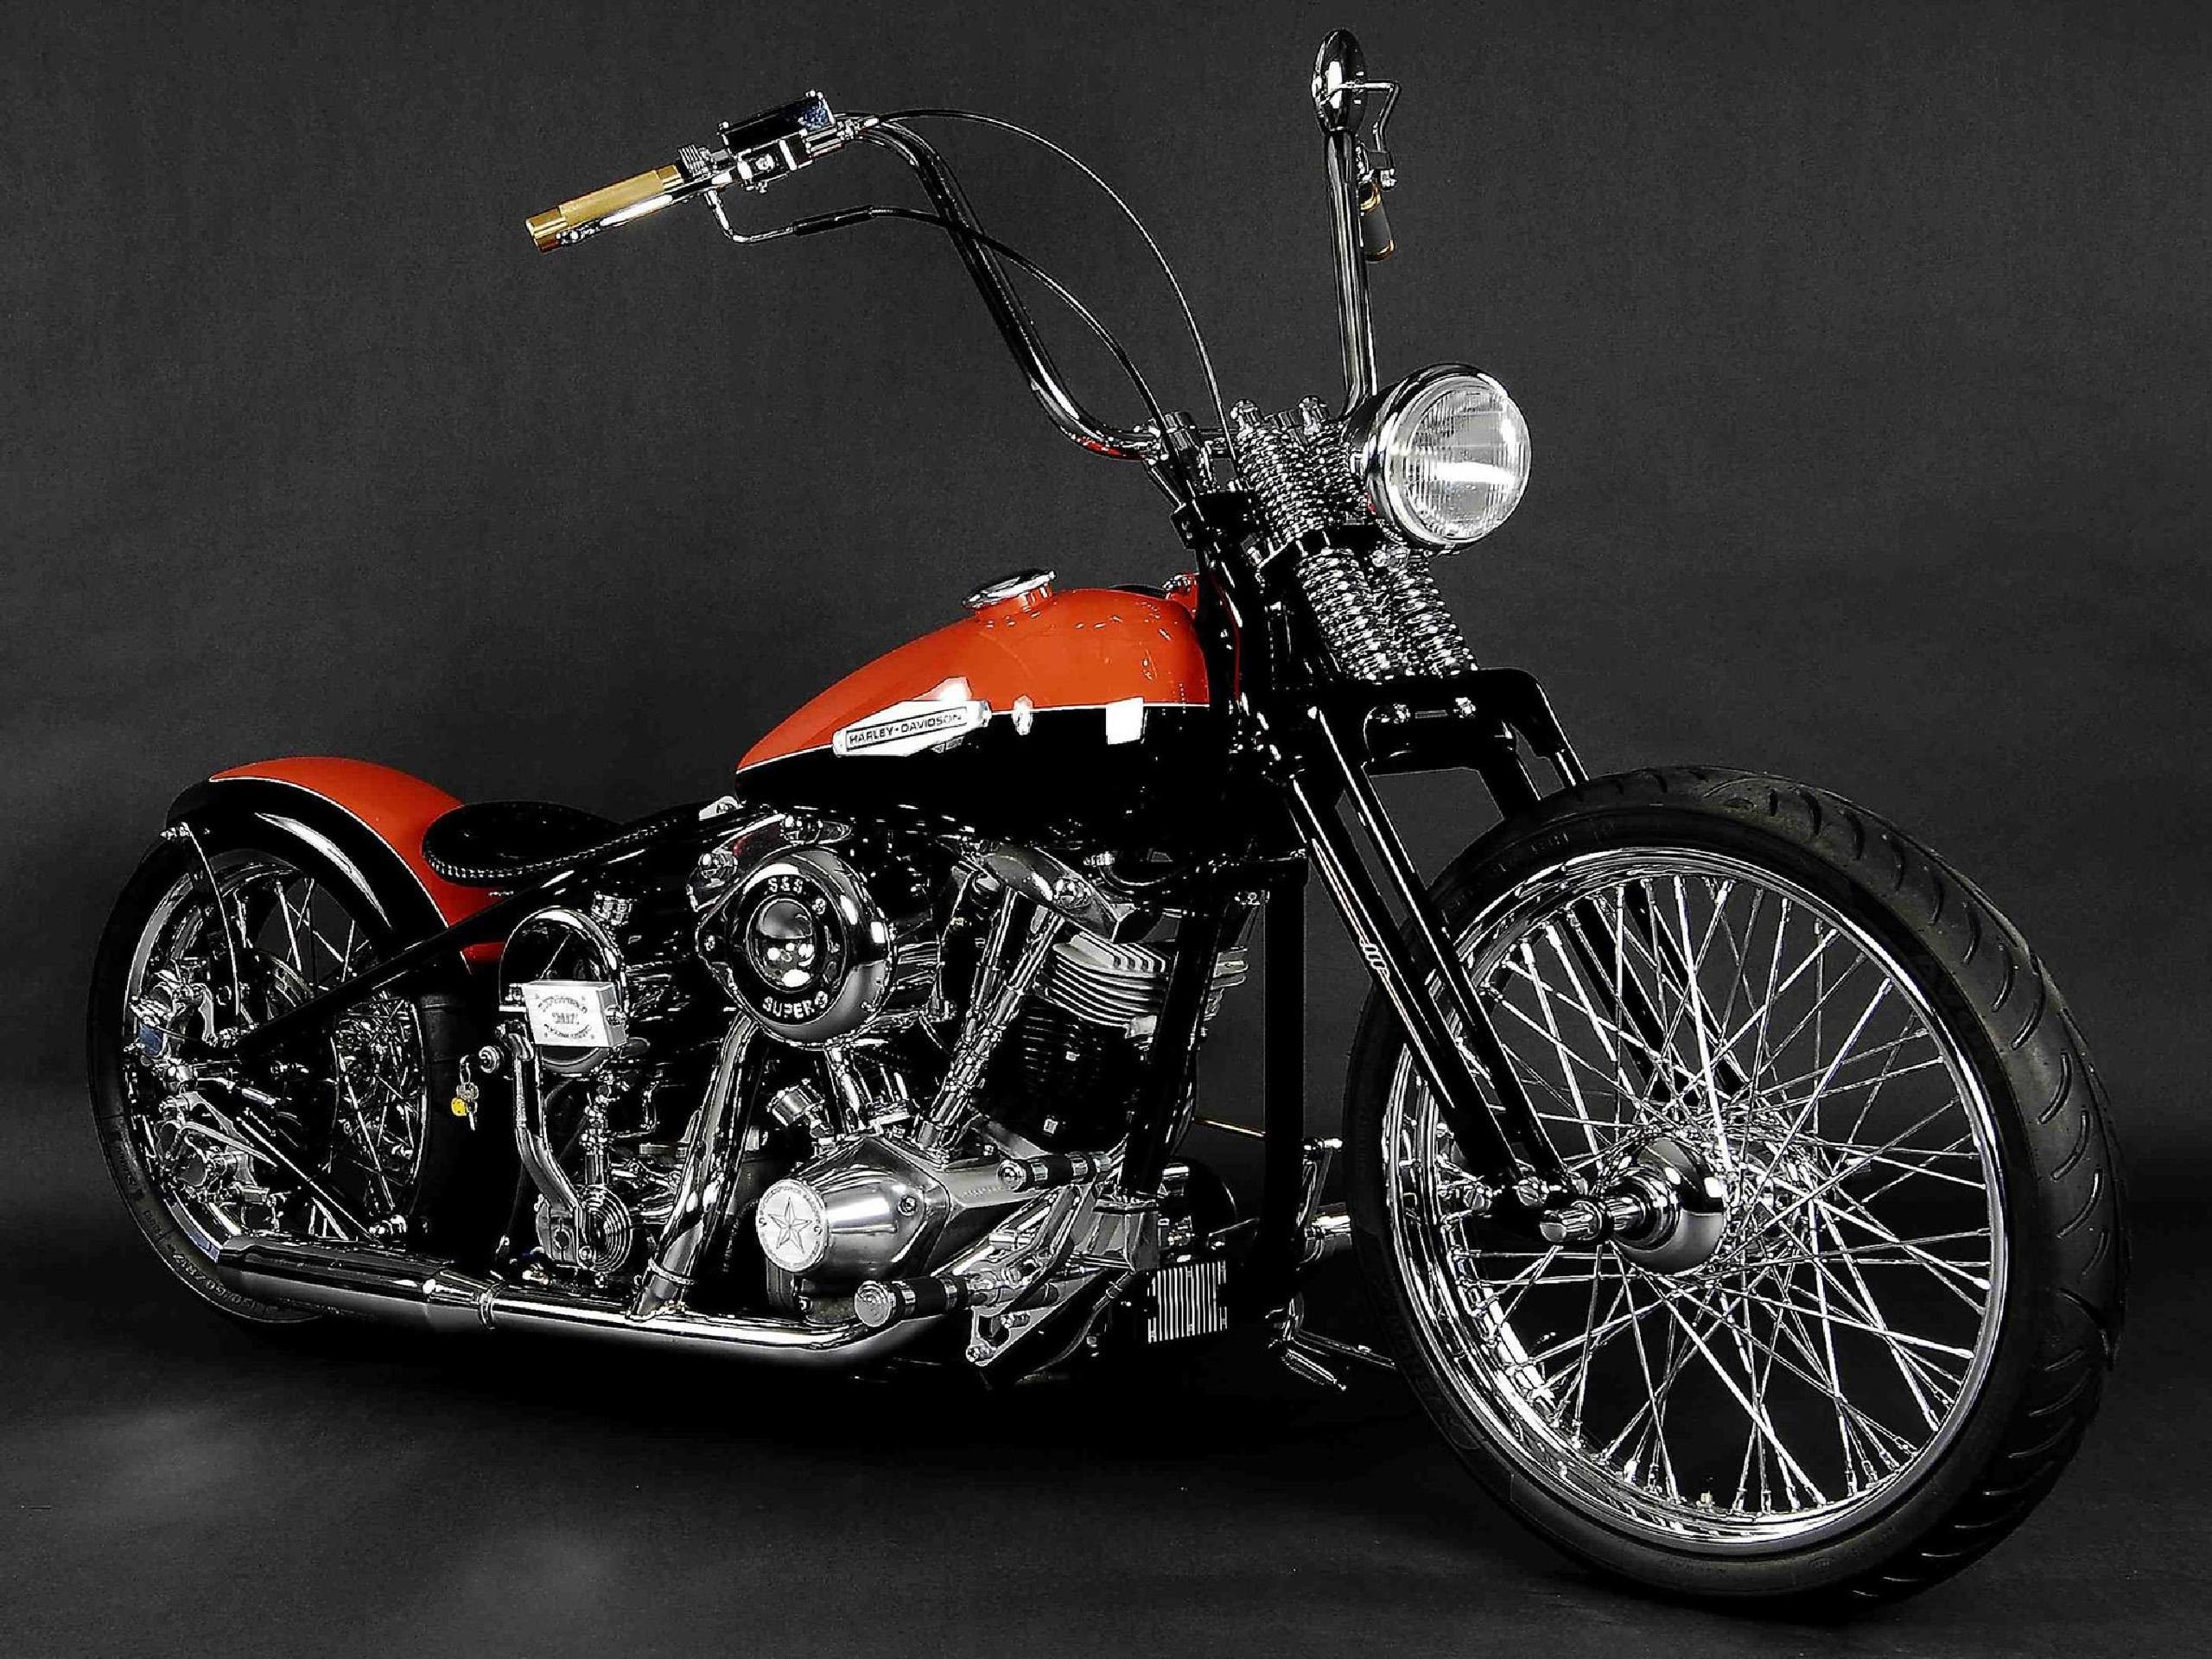 2560x1920 0 720x1280 davidson wallpaper for iphone  harley davidson  background hd wallpapers apple mac wallpapers .